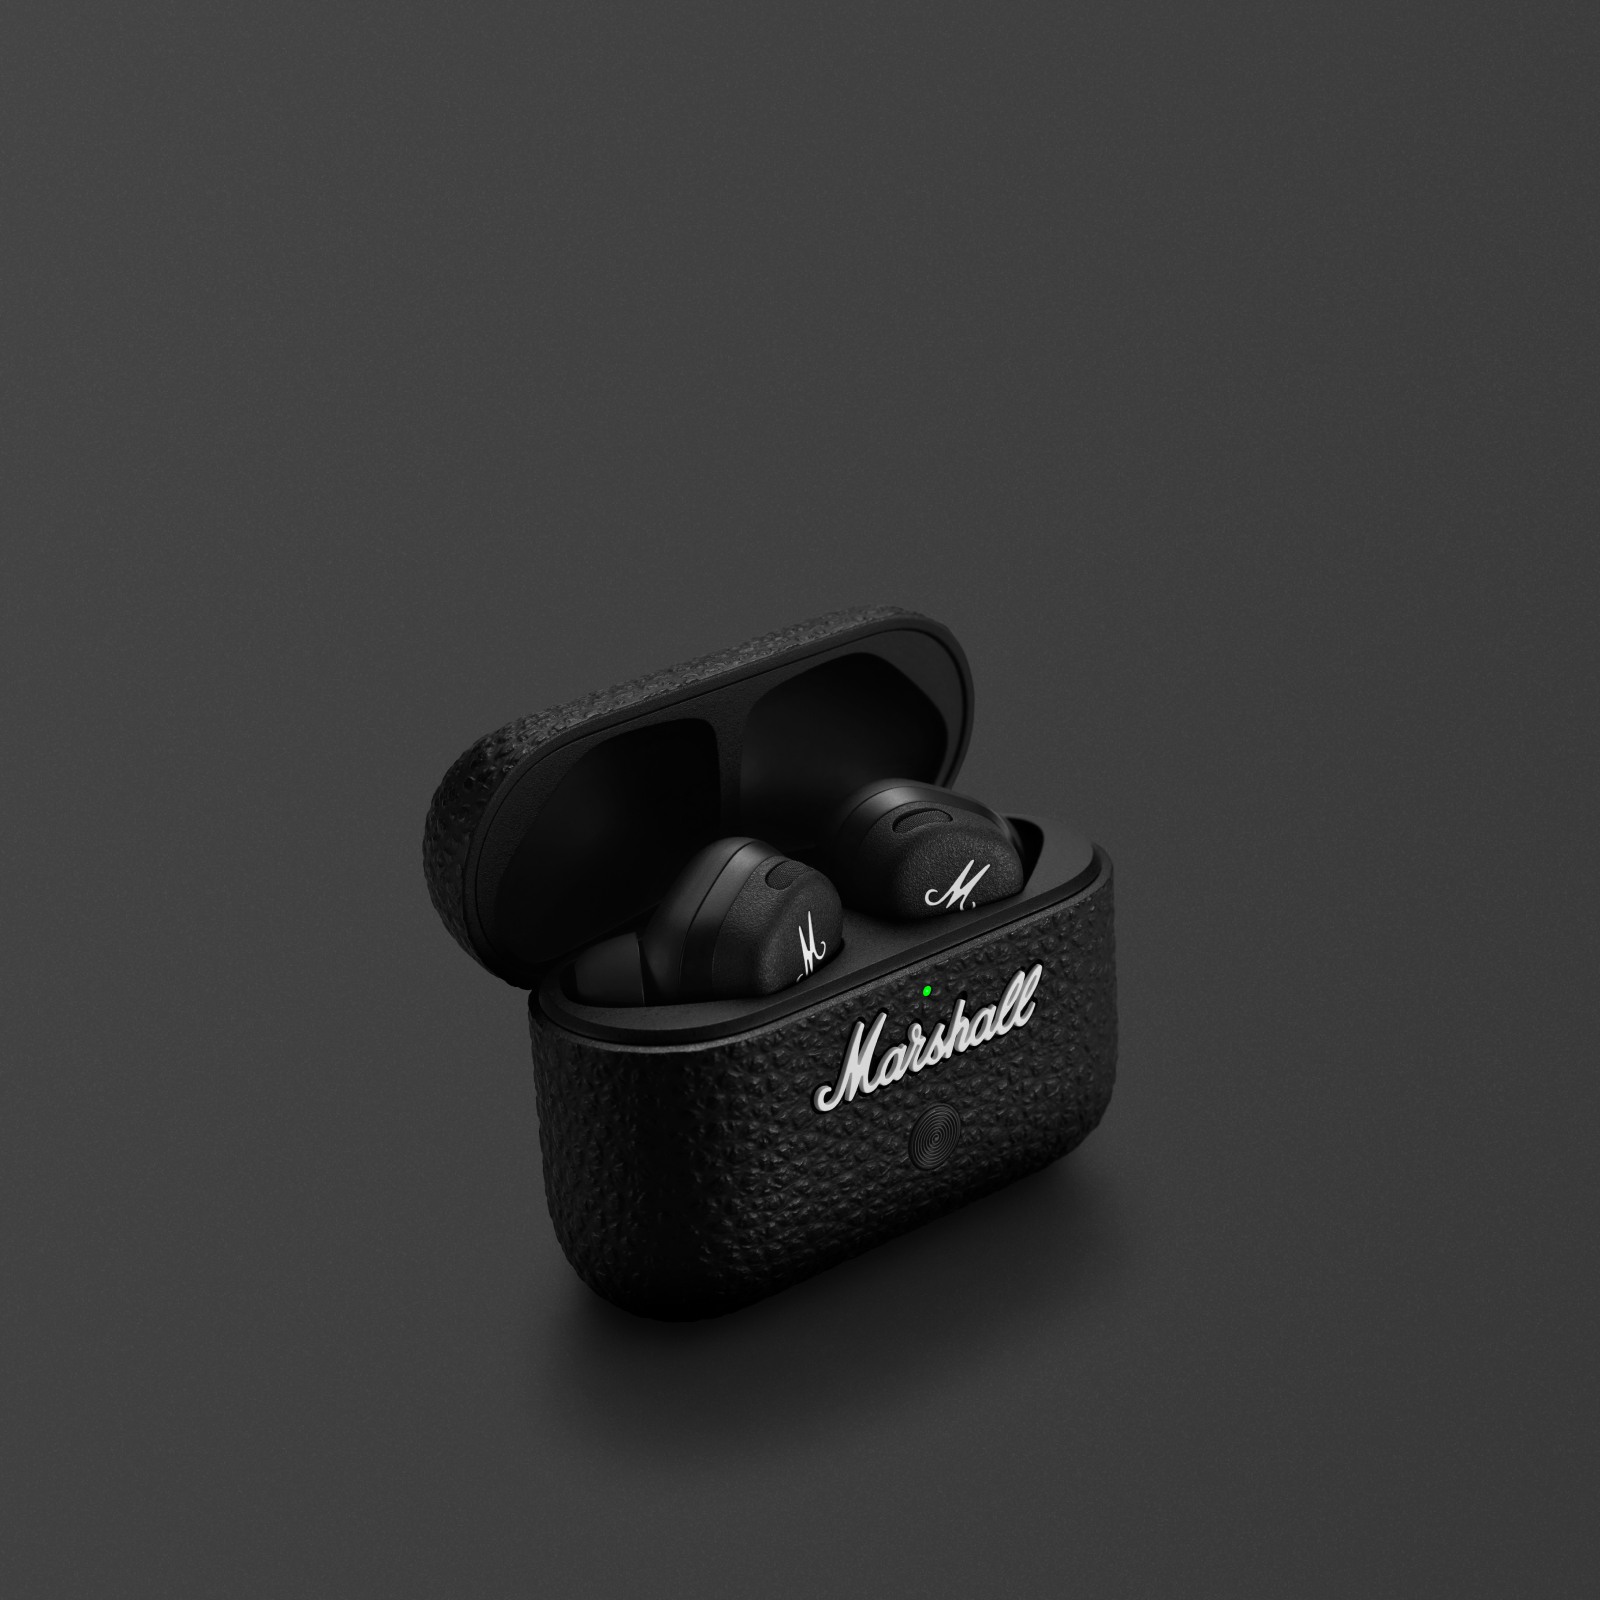 The Marshall MOTIF II A.N.C. BLACK earphones with a gold case.